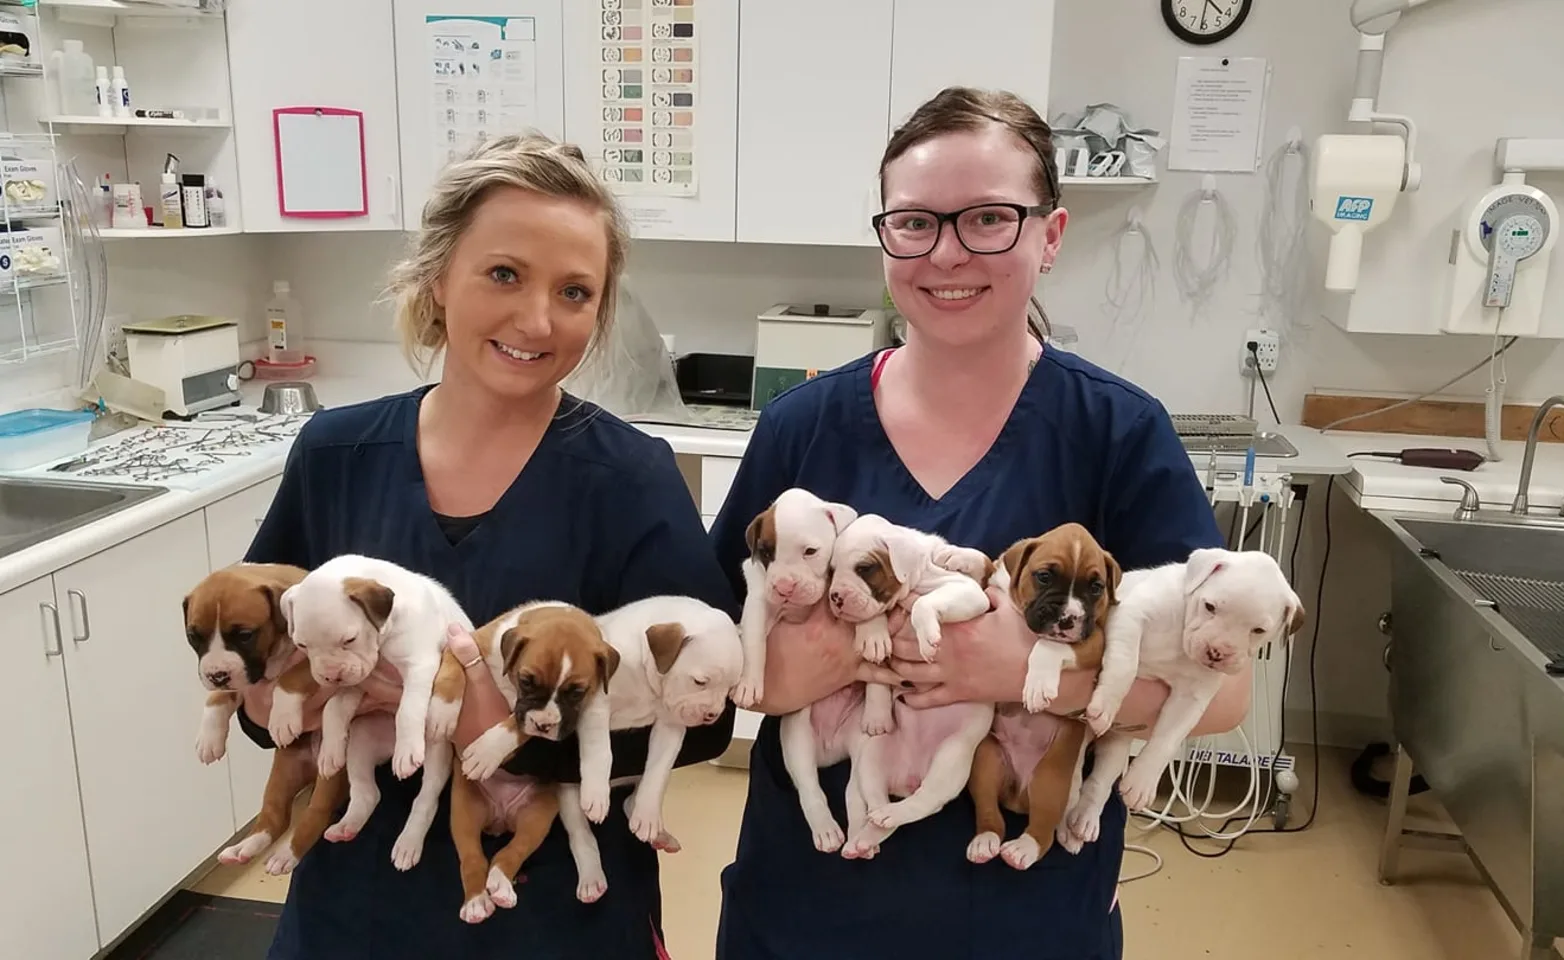 Payson Pet Care staff holding puppies